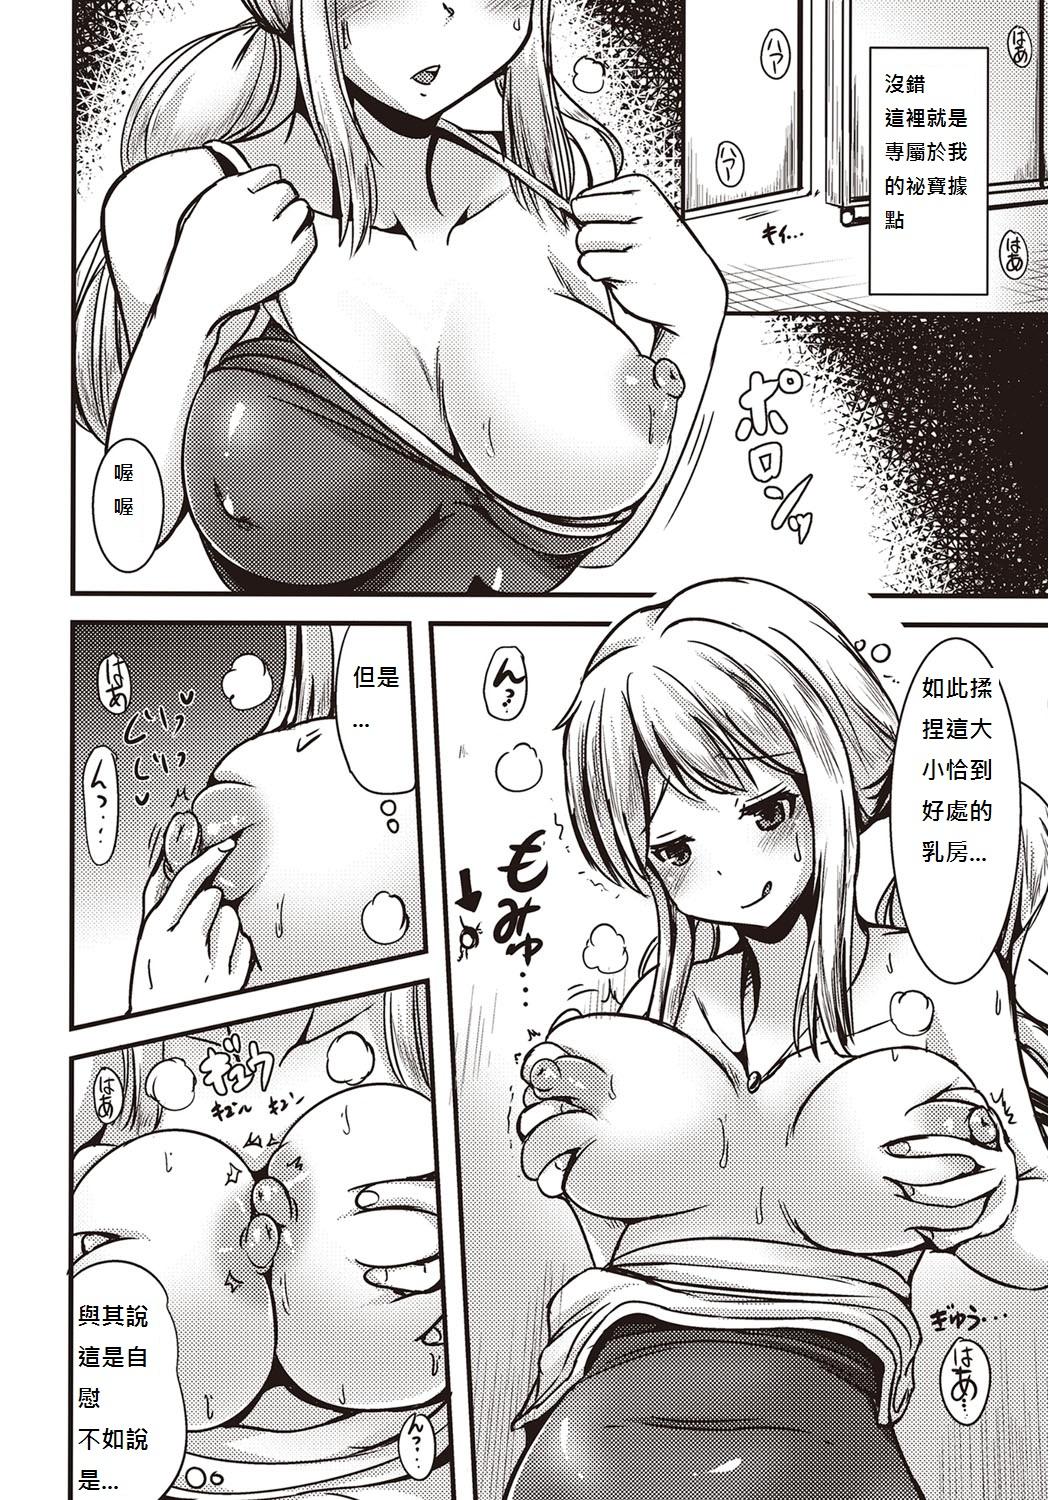 Gays Chishoujo Suit Relax - Page 4